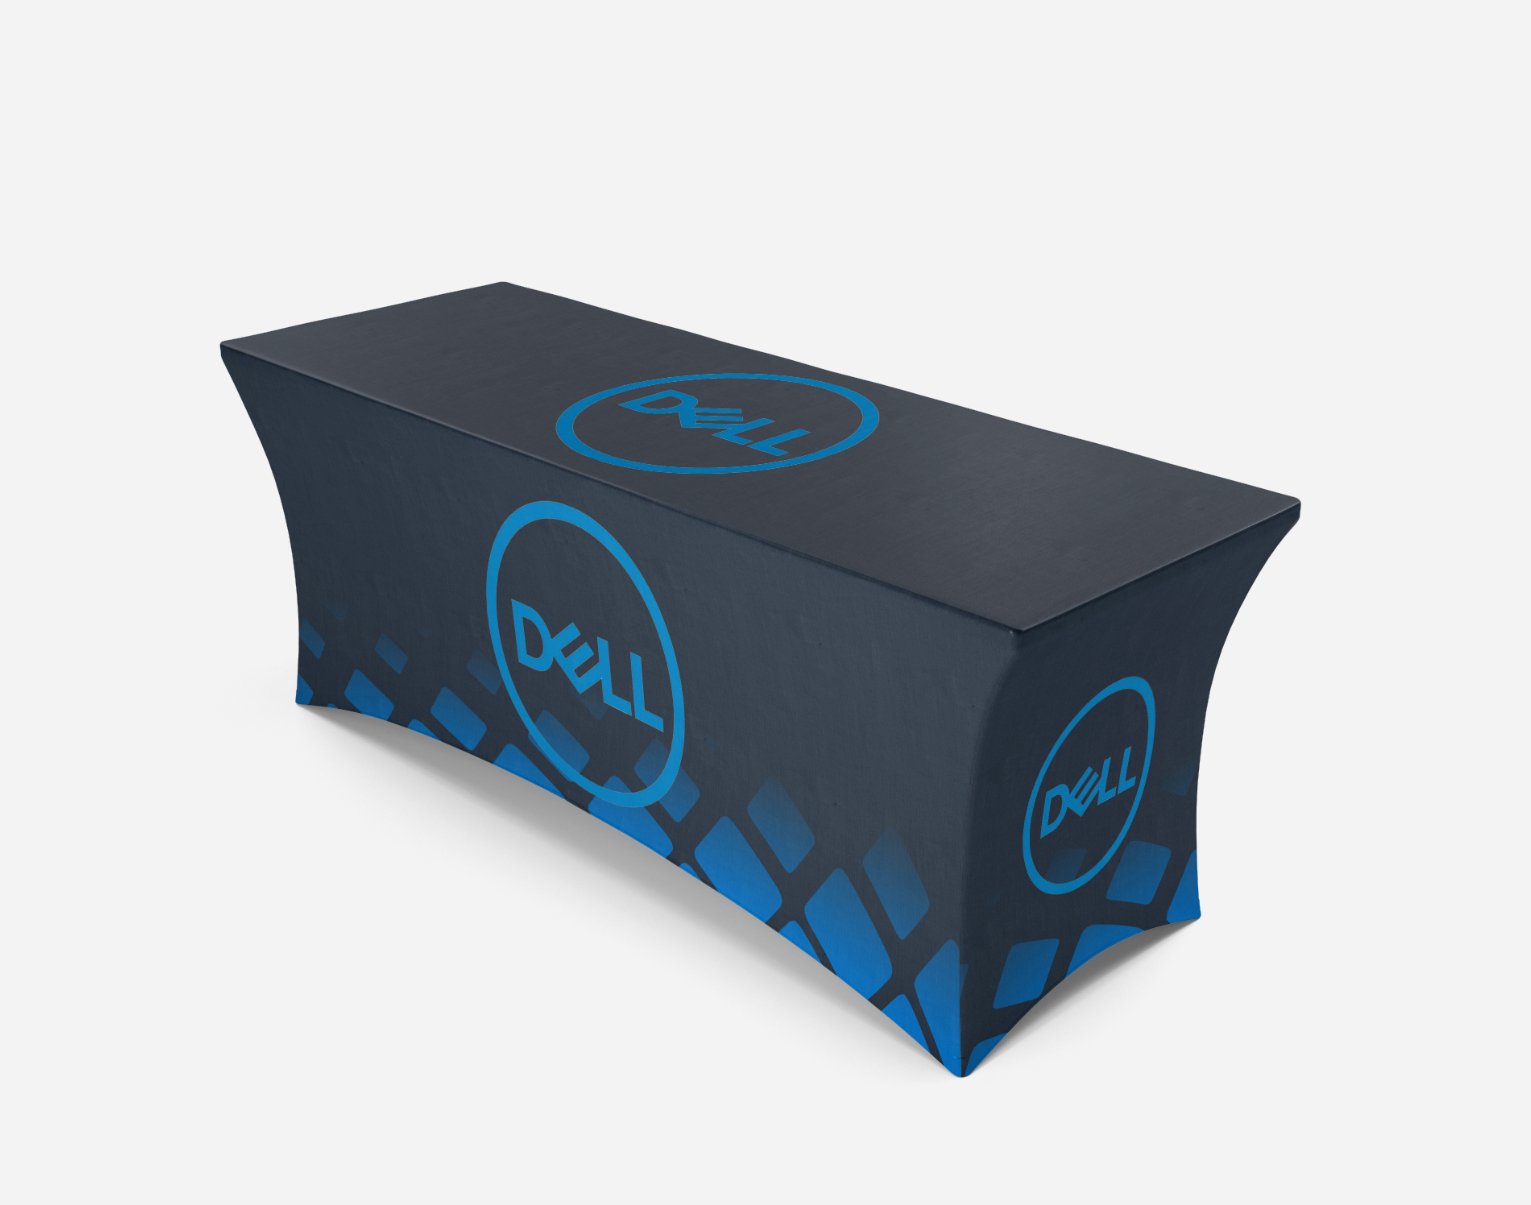 Custom Stretch Table Cover - Canopy Customs